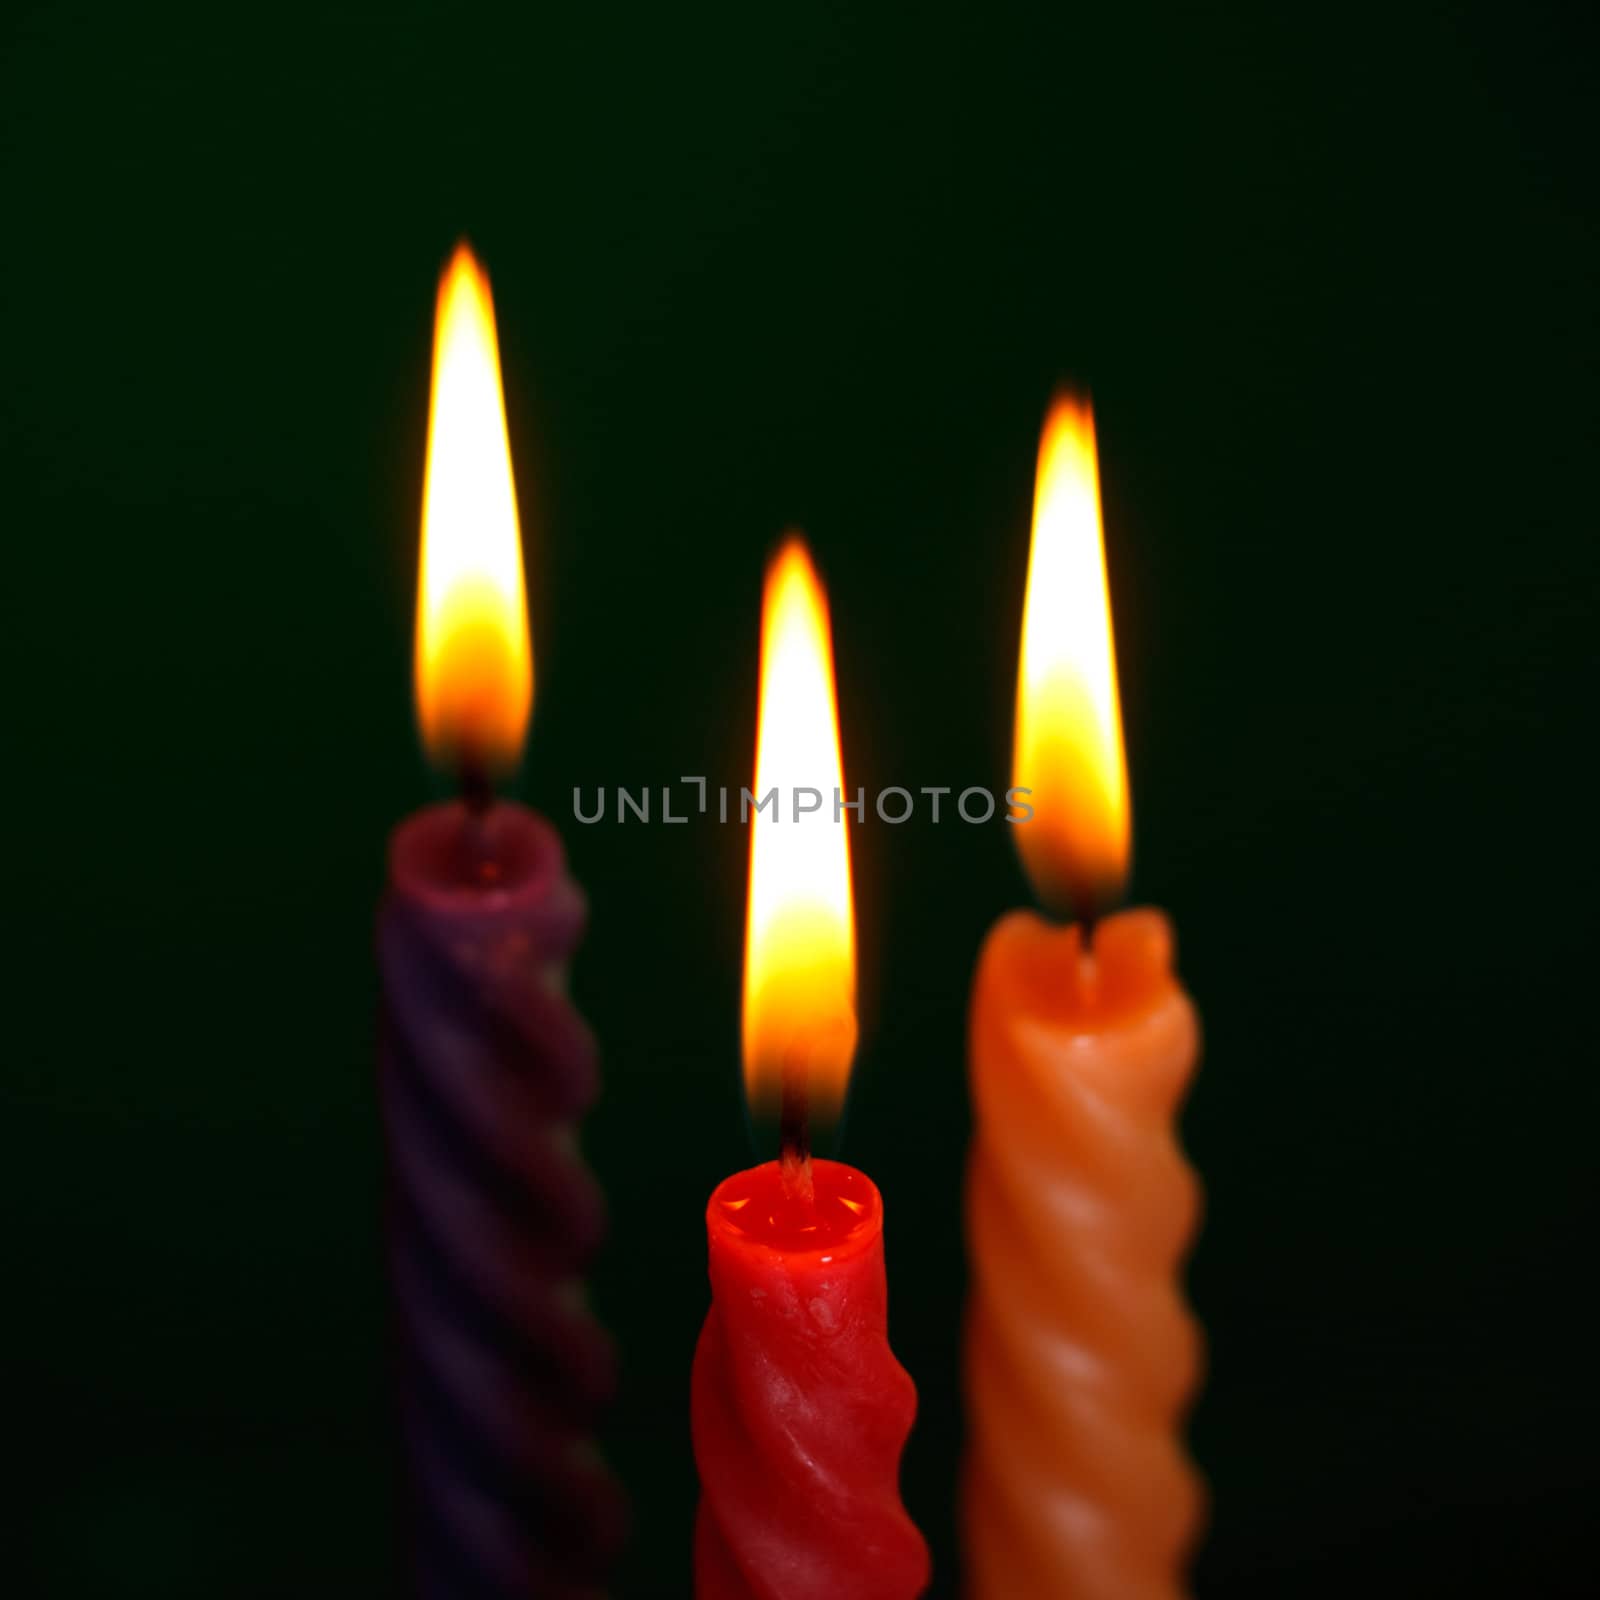 three twisted burning candles over black background